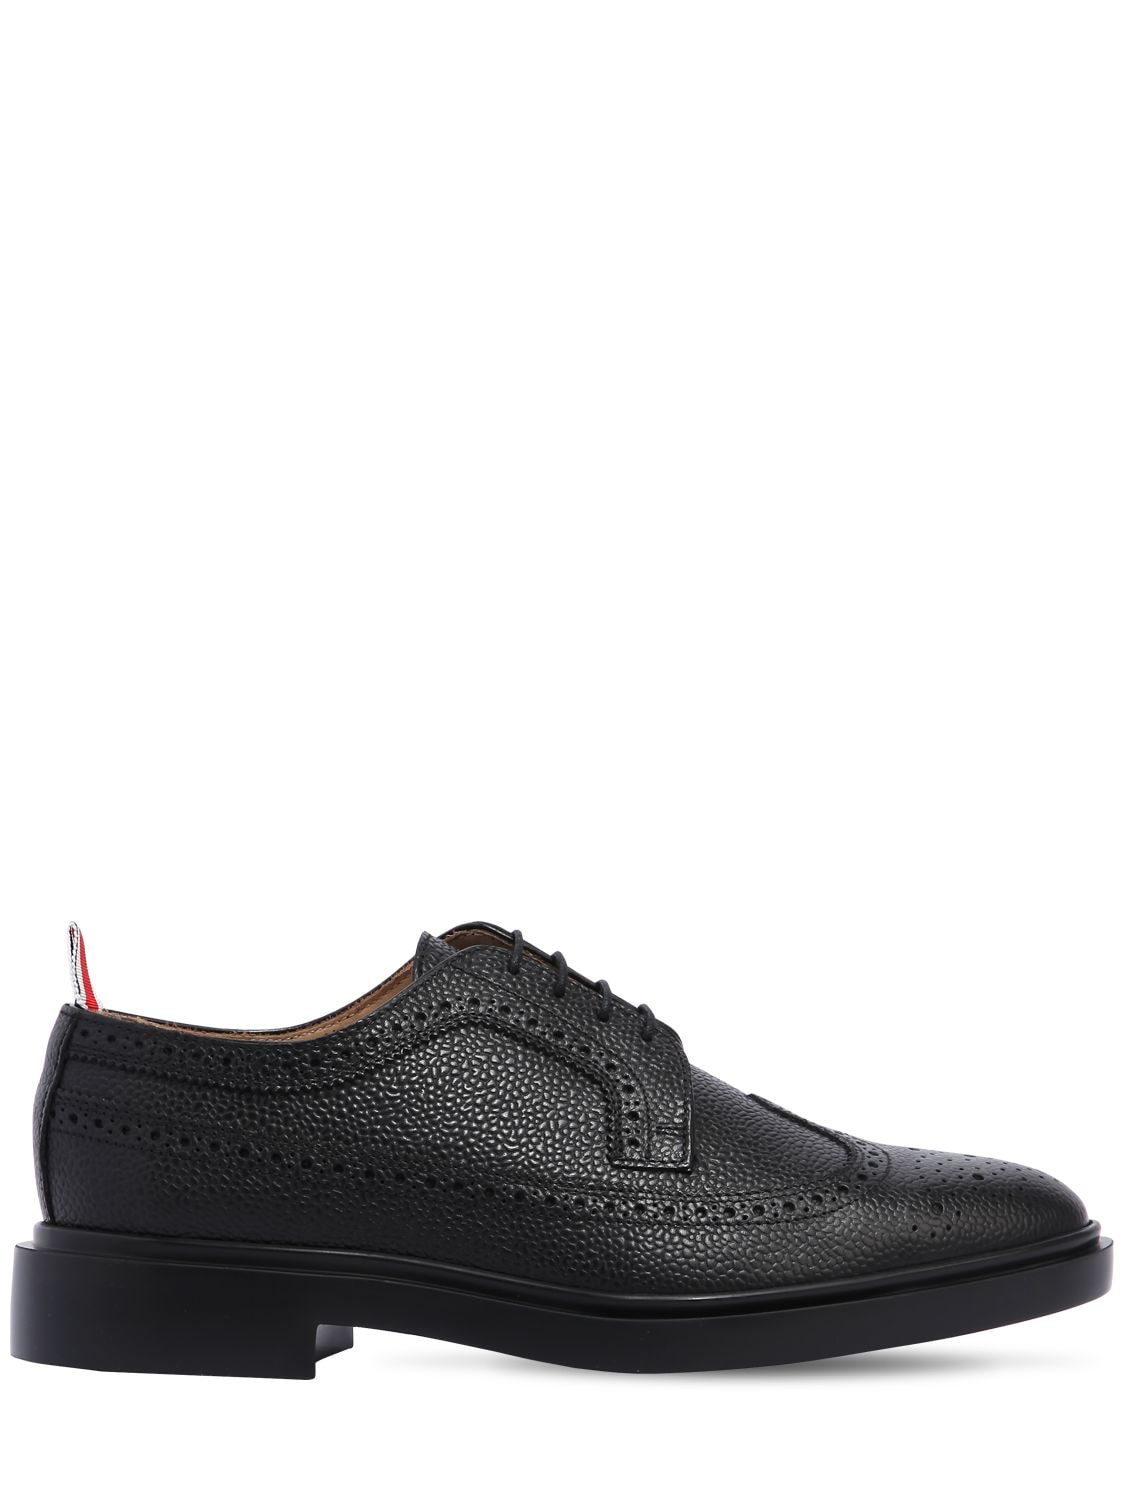 Image of Pebbled Leather Wing Tip Brogue Shoes